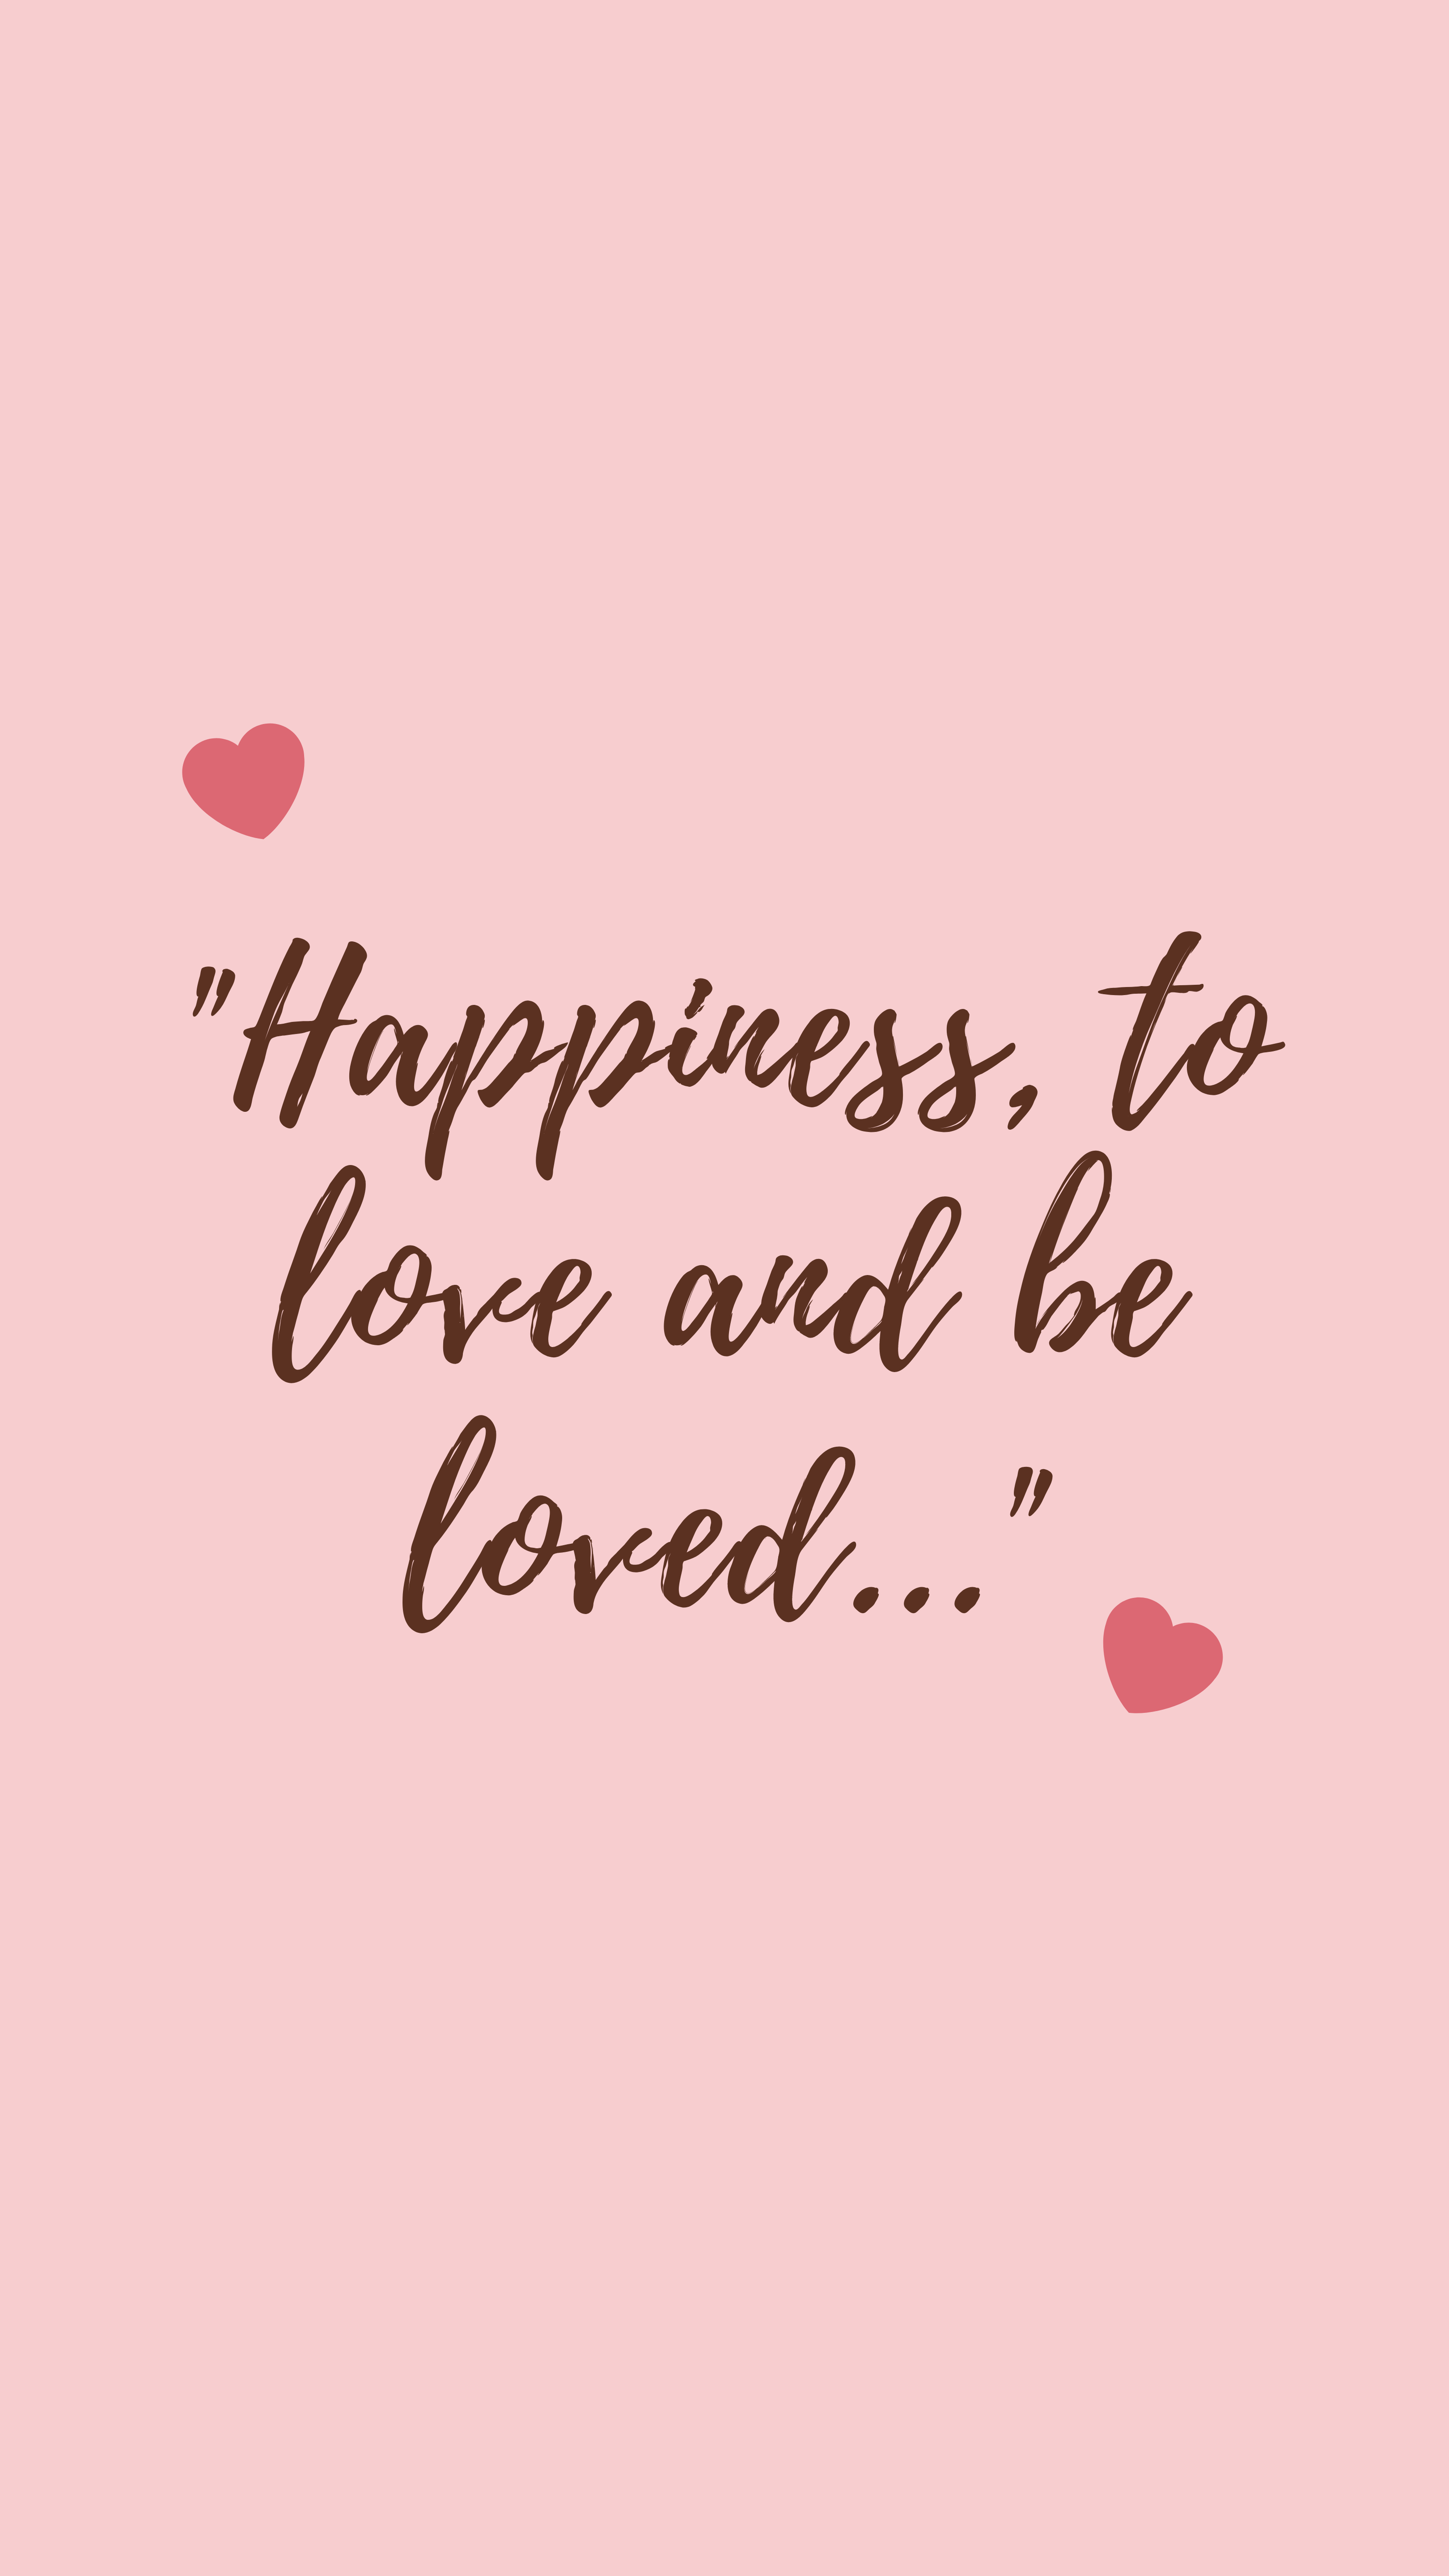 happiness, love, quote, words, phrase, quotation, feelings Full HD